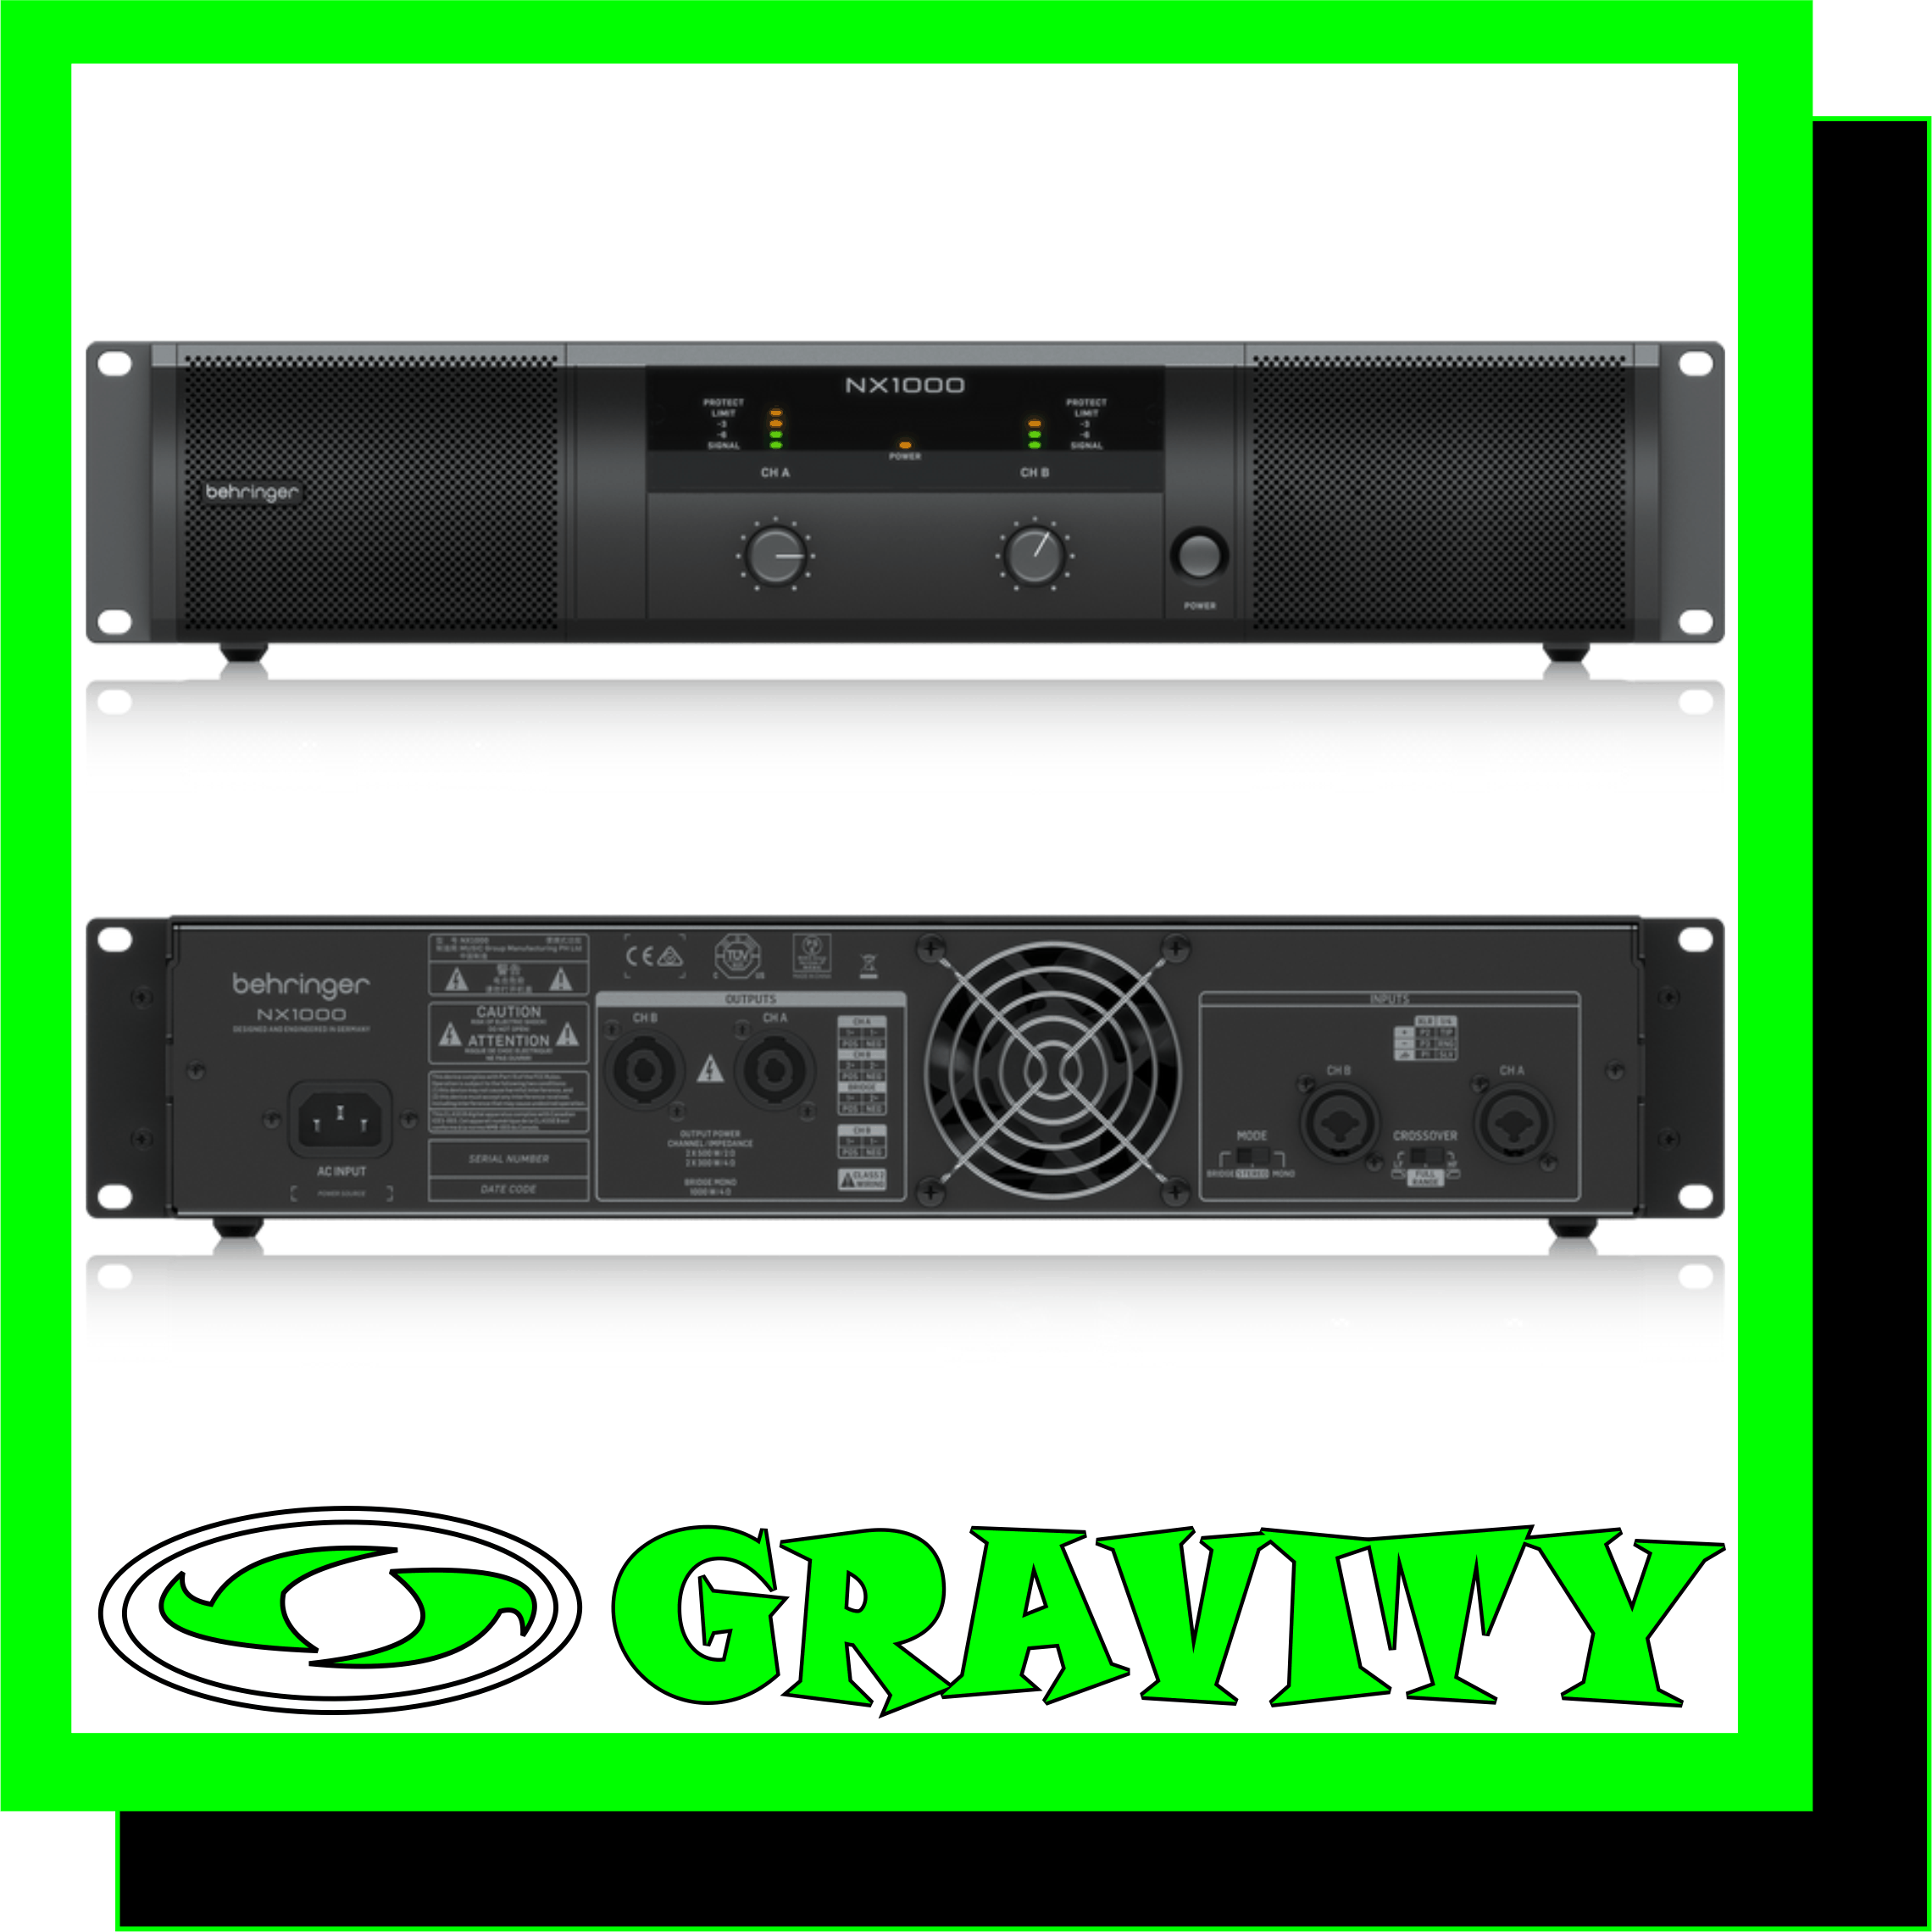 NX1000 Ultra-Lightweight 1000-Watt Class-D Power Amplifier with SmartSense Loudspeaker Impedance Compensation  -Delivers 2 x 500 Watts into 2 Ohms; 2 x 300 Watts into 4 Ohms; 1000 Watts into 4 Ohms (bridge mode) and weighs less than 7.3 lbs / 3.3 kg -Ultimate reliability through revolutionary cool-running High-Density Class-D technology with “near-zero” thermal buildup -Ultra-efficient switch-mode power supply for noise-free audio, superior transient response and low power consumption -Built-in stereo crossover with low-cut, high-cut and full range mode -SmartSense Loudspeaker impedance compensation features fully linear frequency response at any speaker load impedance -“Zero-Attack” limiters offer maximum output level with reliable overload protection -Detented and illuminated gain controls for precise level setting -Precise 4-segment Signal and Limit LEDs to monitor performance -XLR and 1/4” TRS combination input connectors for compatibility with any source -Professional twist-lock speaker connectors for ultimate reliability -Independent DC, LF and thermal overload protection on each channel automatically protects amplifier and speakers without shutting down the show “Back-to-front” ventilation system prevents thermal buildup for reliable operation  NX1000 The NX1000 power amplifier packs 1000 Watts (2 x 500 Watts @ 2 Ohms; 2 x 300 Watts @ 4 Ohms; 1000 Watts into 4 Ohms bridge mode) into exceptionally lightweight (7.3 lbs / 3.3 kg) and rack-mountable packages. And because the NX1000 is so much more efficient than conventional designs, it runs cooler and doesn’t require the massive heat sinks and heavy toroid transformers typically associated with its conventional counterparts. Thanks to our “Zero-Attack” limiters that offer maximum output level with exceptionally-reliable overload protection and SmartSense Loudspeaker impedance compensation, which provides fully linear frequency response at any speaker load impedance, you can run the NX1000 full-out for hours on-end. Our revolutionary high-density Class-D technology, combined with an ultra-efficient, switch-mode power supply ensure this feather-light powerhouse will drive your rig effortlessly for many years to come.  Class-D – Massive Power, Perfect Sound Thanks to our High-Density Class-D amplifier Technology, we are able to provide you with enormous power and incredible sonic performance in an easy-to-use, ultra-portable and lightweight package. Class-D amplification makes all the difference, offering the ultimate in energy efficiency – and eliminating the need for heavy power supplies and massive heat sinks. This amazing technology makes it possible to design and build extremely powerful products that are significantly lighter in weight than their traditional counterparts, while using less energy and protecting the environment.  Sublimely Simple Operation The front panel controls and indicators provide your system’s vital signs at a glance. After pressing the Power button, the Power LED lights to show the amp is ready for action. All channels feature positive-detent Gain controls with Signal LEDs that light when a signal is present, as well as Limit LEDs to indicate when the amplifier is running at full capacity. Just as elegant as the front, the rear panel is home to the combo XLR and 1/4? TRS Input connectors, making the NX1000 compatible with virtually any source, balanced or unbalanced. Professional twist-lock speaker sockets are provided to ensure every drop of output power gets to your loudspeakers.  The rear panel is also where you’ll find the switches that enable the NX1000 amp to run in your choice of dual mono, stereo or mono bridge modes. The NX1000’s built-in Crossover switch sets the amp to Full-Range mode, where the output is sent unfiltered to your loudspeakers, or Bi-amp mode, which sends only the low-frequency content (<100 Hz) to passive subwoofers, while the high-frequency content (>100 Hz) is channeled to your full-range loudspeakers.  SmartSense Impedance Compensation Our new SmartSense Technology puts the punch back into Class-D amplification, providing vastly improved full-range frequency response with more powerfully-dynamic bass, and smoother high-frequency reproduction. The resulting output is no longer dependent on the actual load, but is rendered perfectly ruler flat via impedance compensation. NX1000’s design also incorporates a significantly-higher damping factor that yields better amplifier control over the loudspeaker for stronger audio reproduction – especially in the LF area.  Sound Value Sporting massive output ratings, lightweight Class-D technology and an equally lightweight price tag – plus all the amenities a professional audio engineer could ask for – the BEHRINGER NX1000 power amplifier is a serious amp for your most demanding applications.  Experience the BEHRINGER NX1000 amplifier at your local dealer, or get yours online today, and find out why more and more professionals are turning to BEHRINGER amplifiers for their superb performance and extraordinary value.